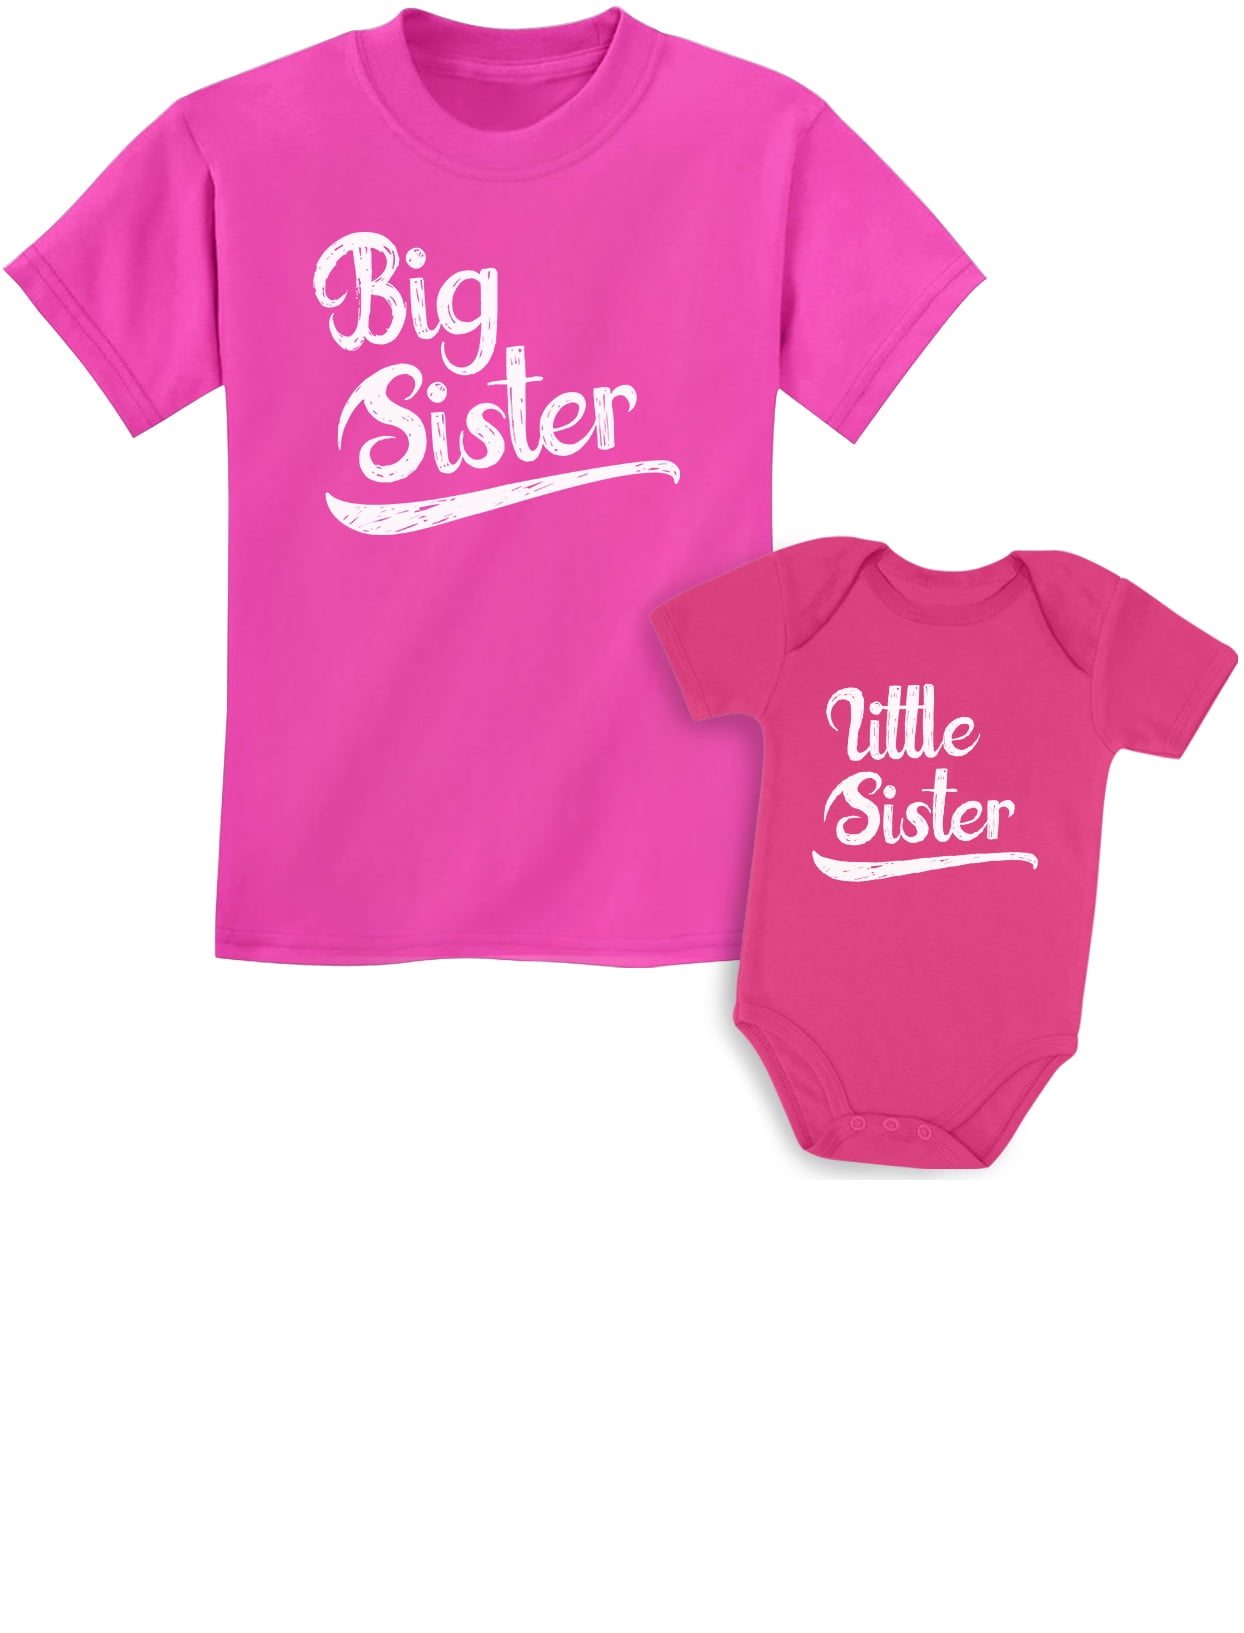 Big Sister Little Sister Matching Outfits Shirt Bodysuit Gifts Girls Newborn Baby Infant Toddler Kids Clothes